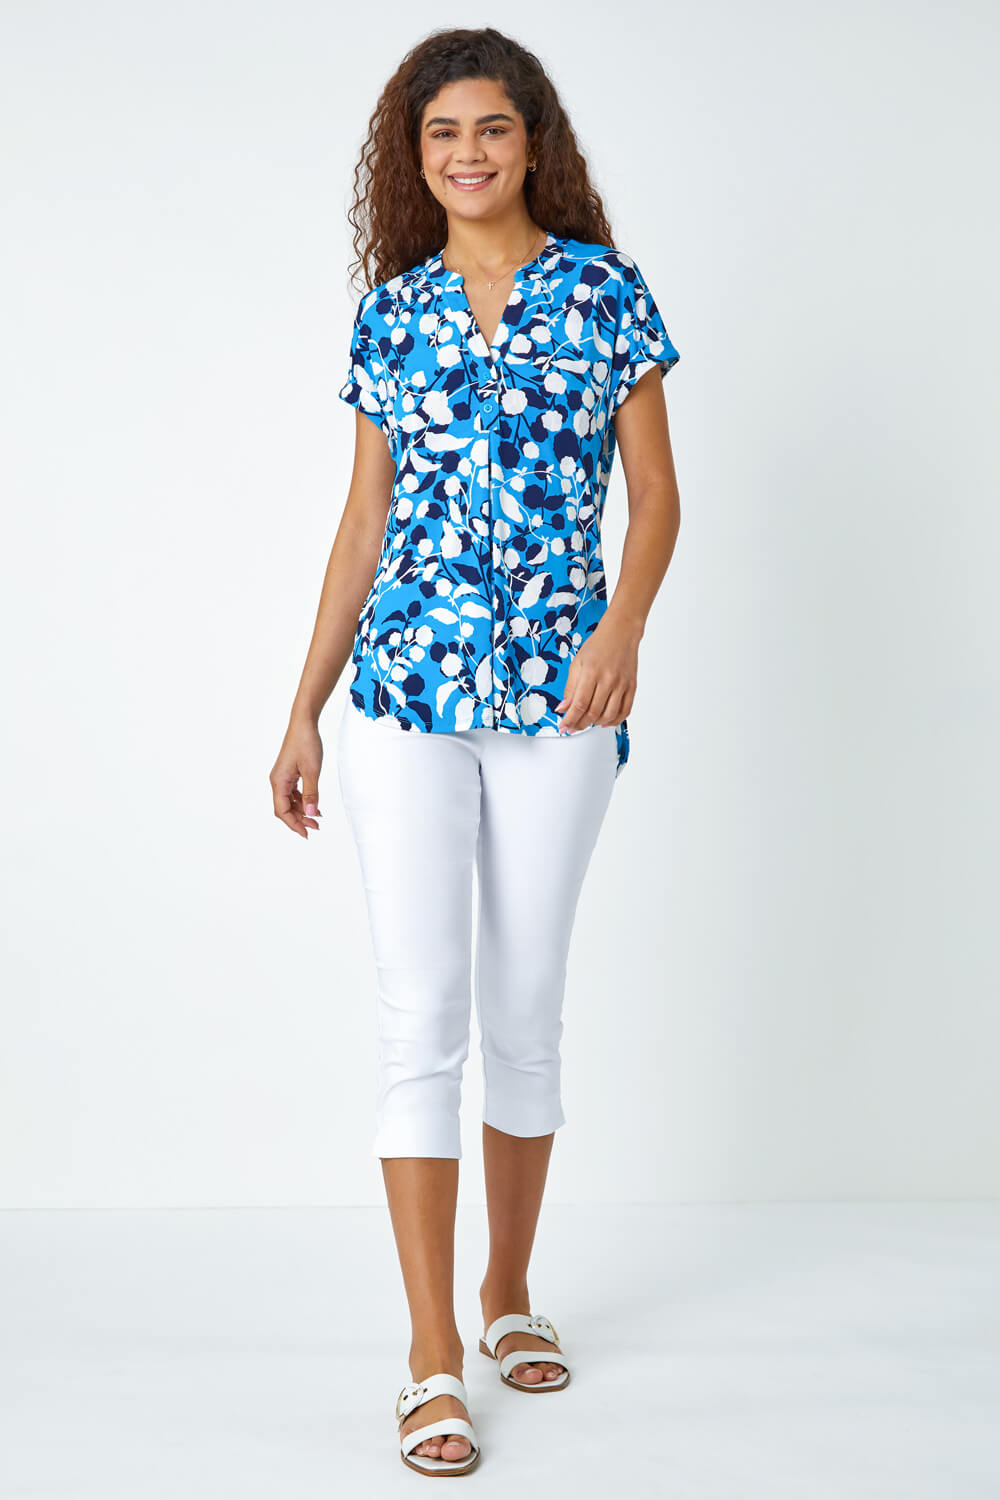 Turquoise Textured Floral Overshirt Stretch Top, Image 2 of 5